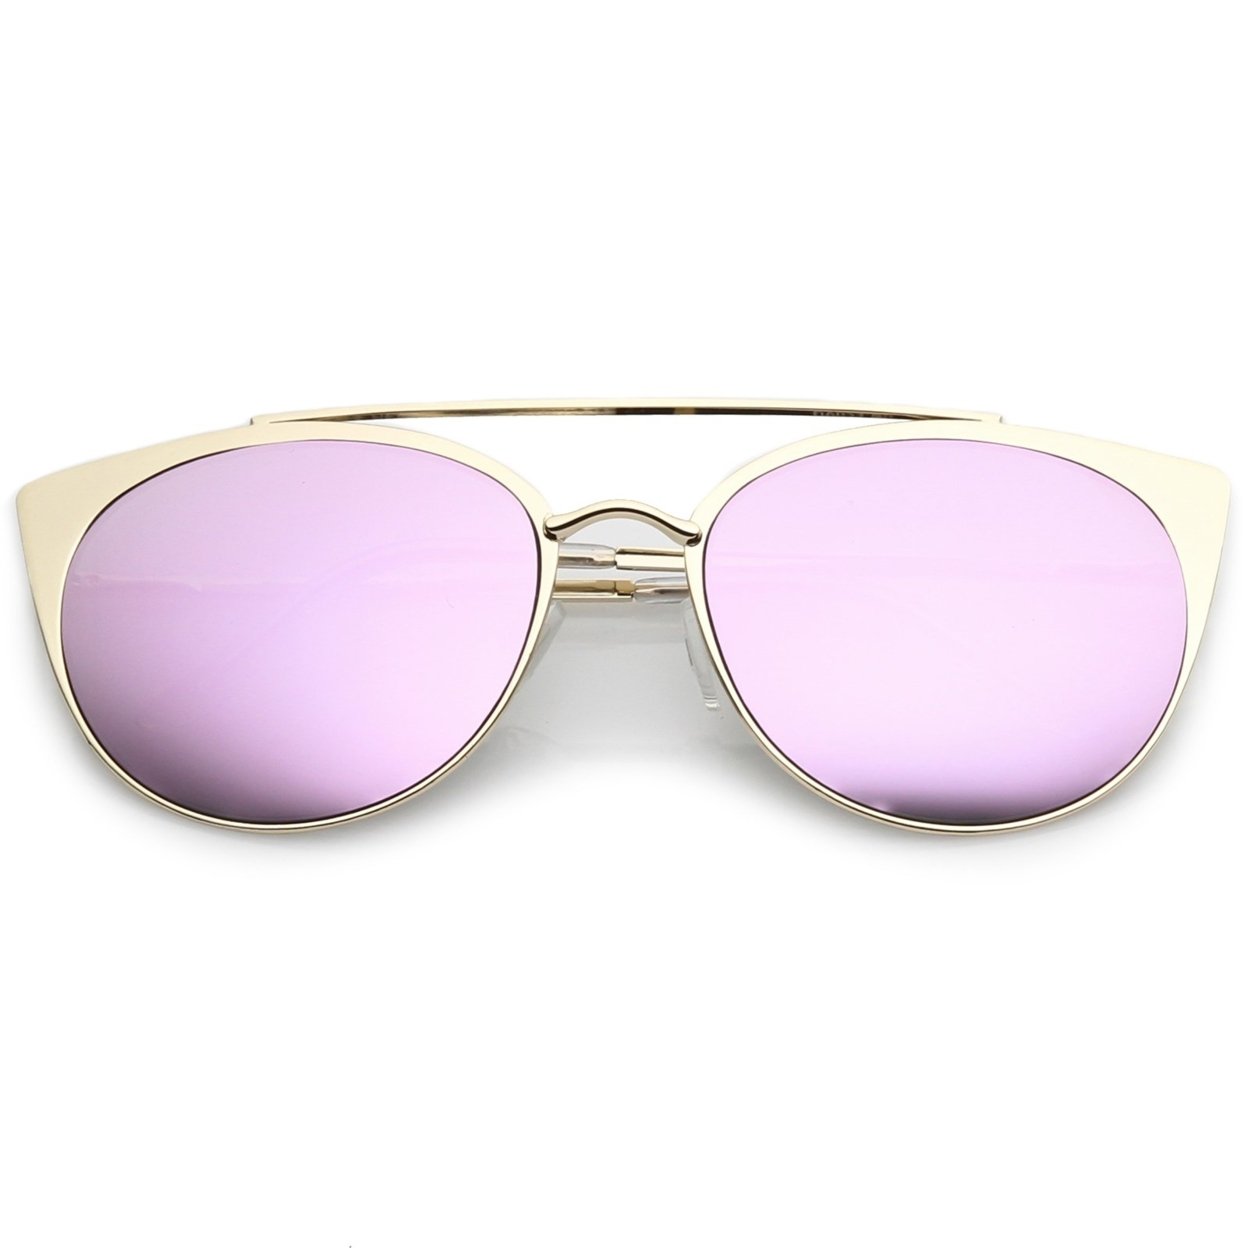 Premium Oversize Metal Cat Eye Sunglasses With Crossbar And Colored Mirror Flat Lens 58mm - Gold / Purple Mirror